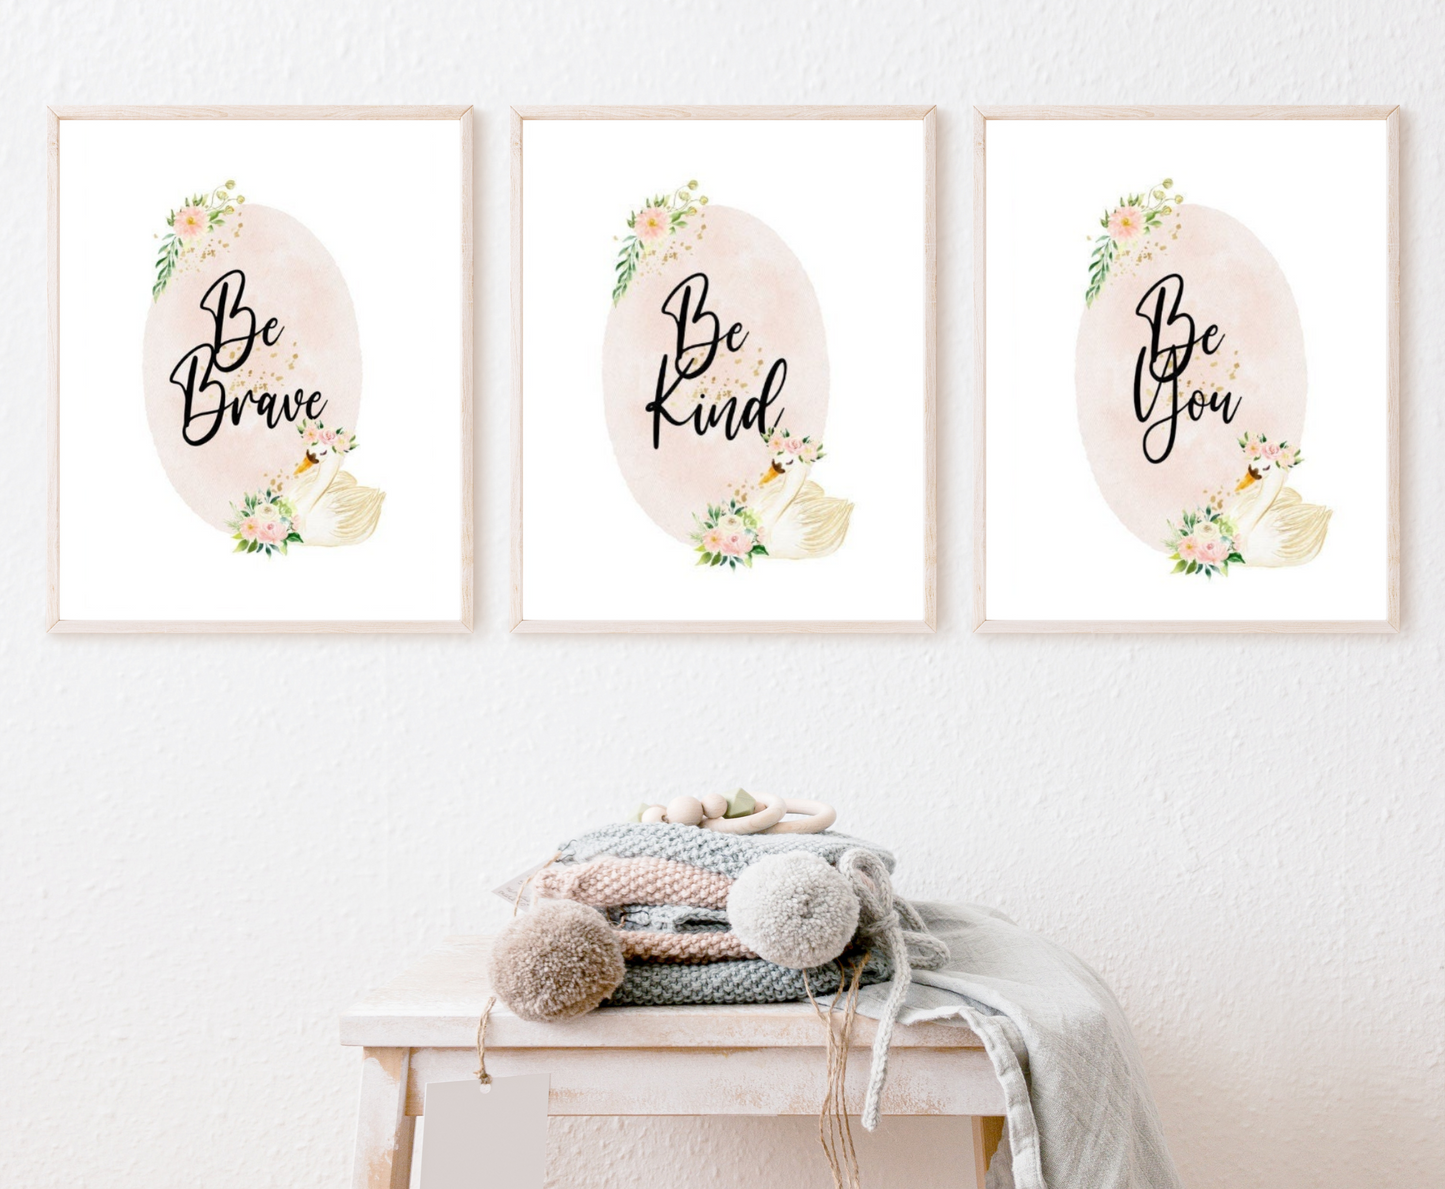 An image showing three graphics hanging on the wall right above a piece of furniture. The three are identical showing a baby pink oval shape decorated with flowers on the top and the bottom of the shape and beside the flowers at the bottom there is a cute goose illustration. The first graphic says” Be Brave”, the second “Be Kind”, and the third “Be You”.